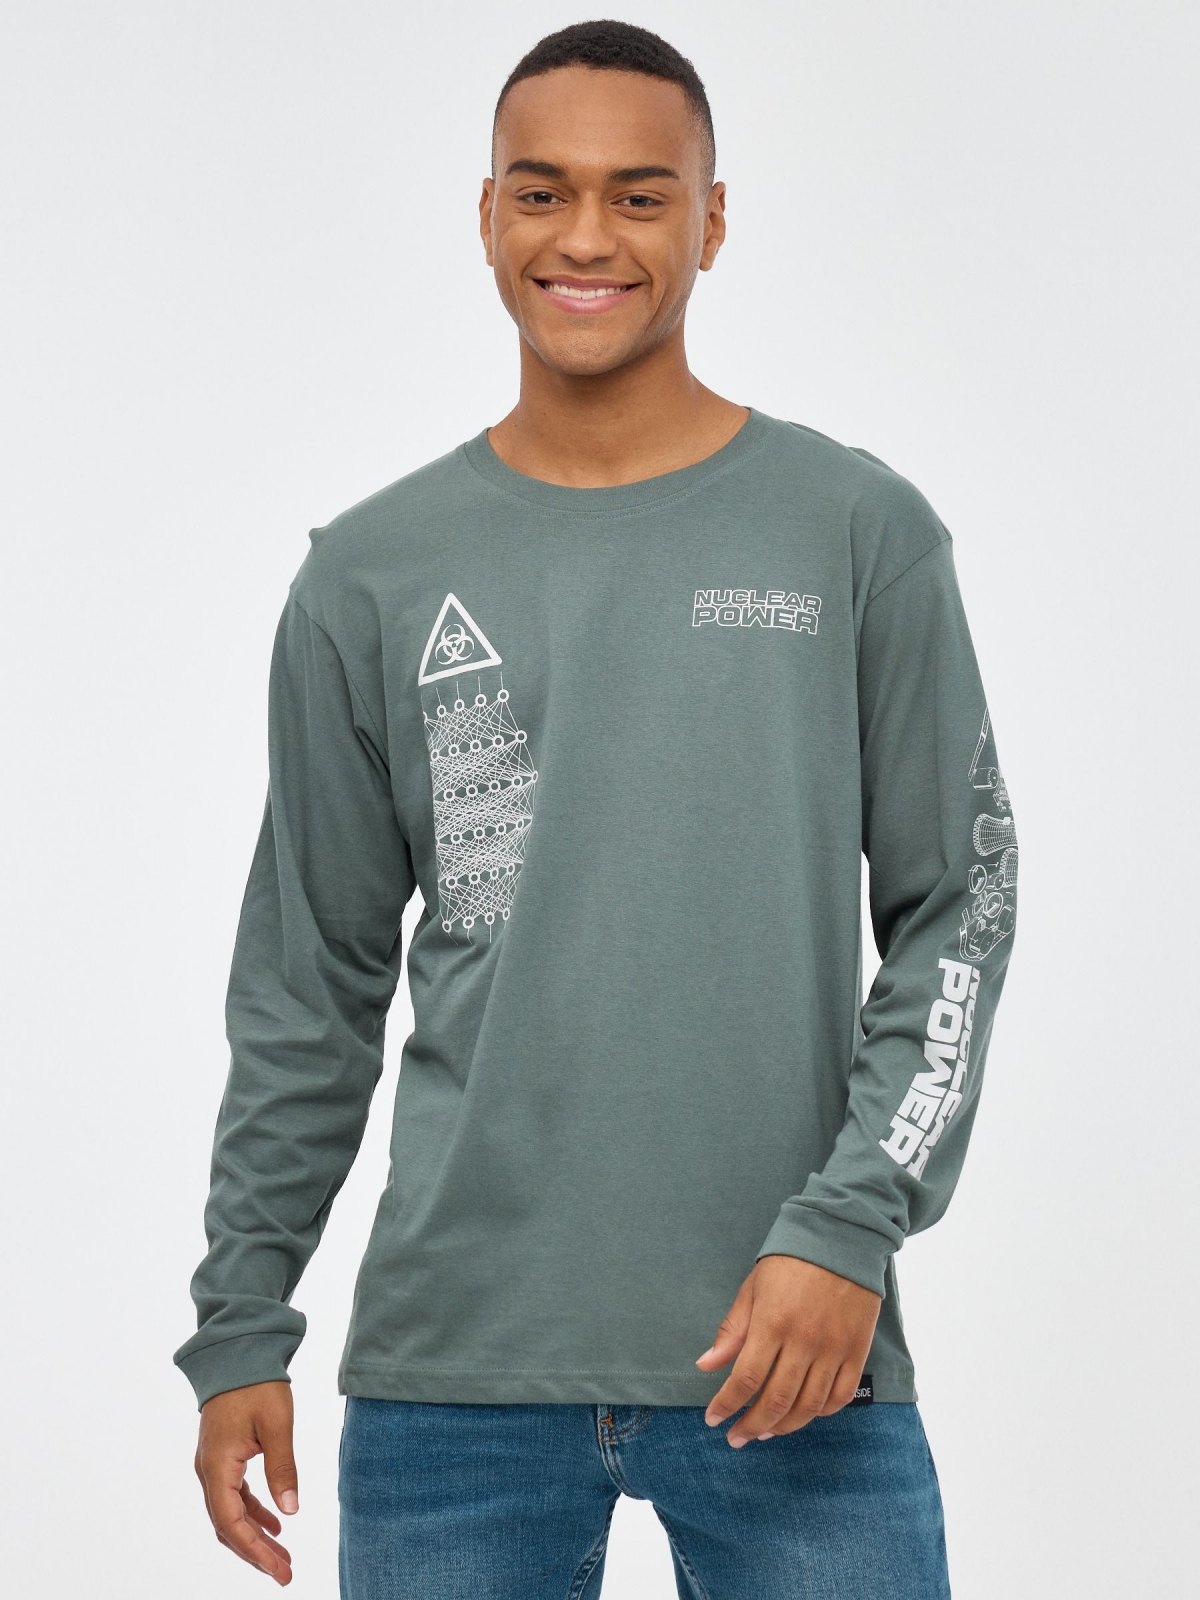 Power print sleeve t-shirt greyish green middle front view